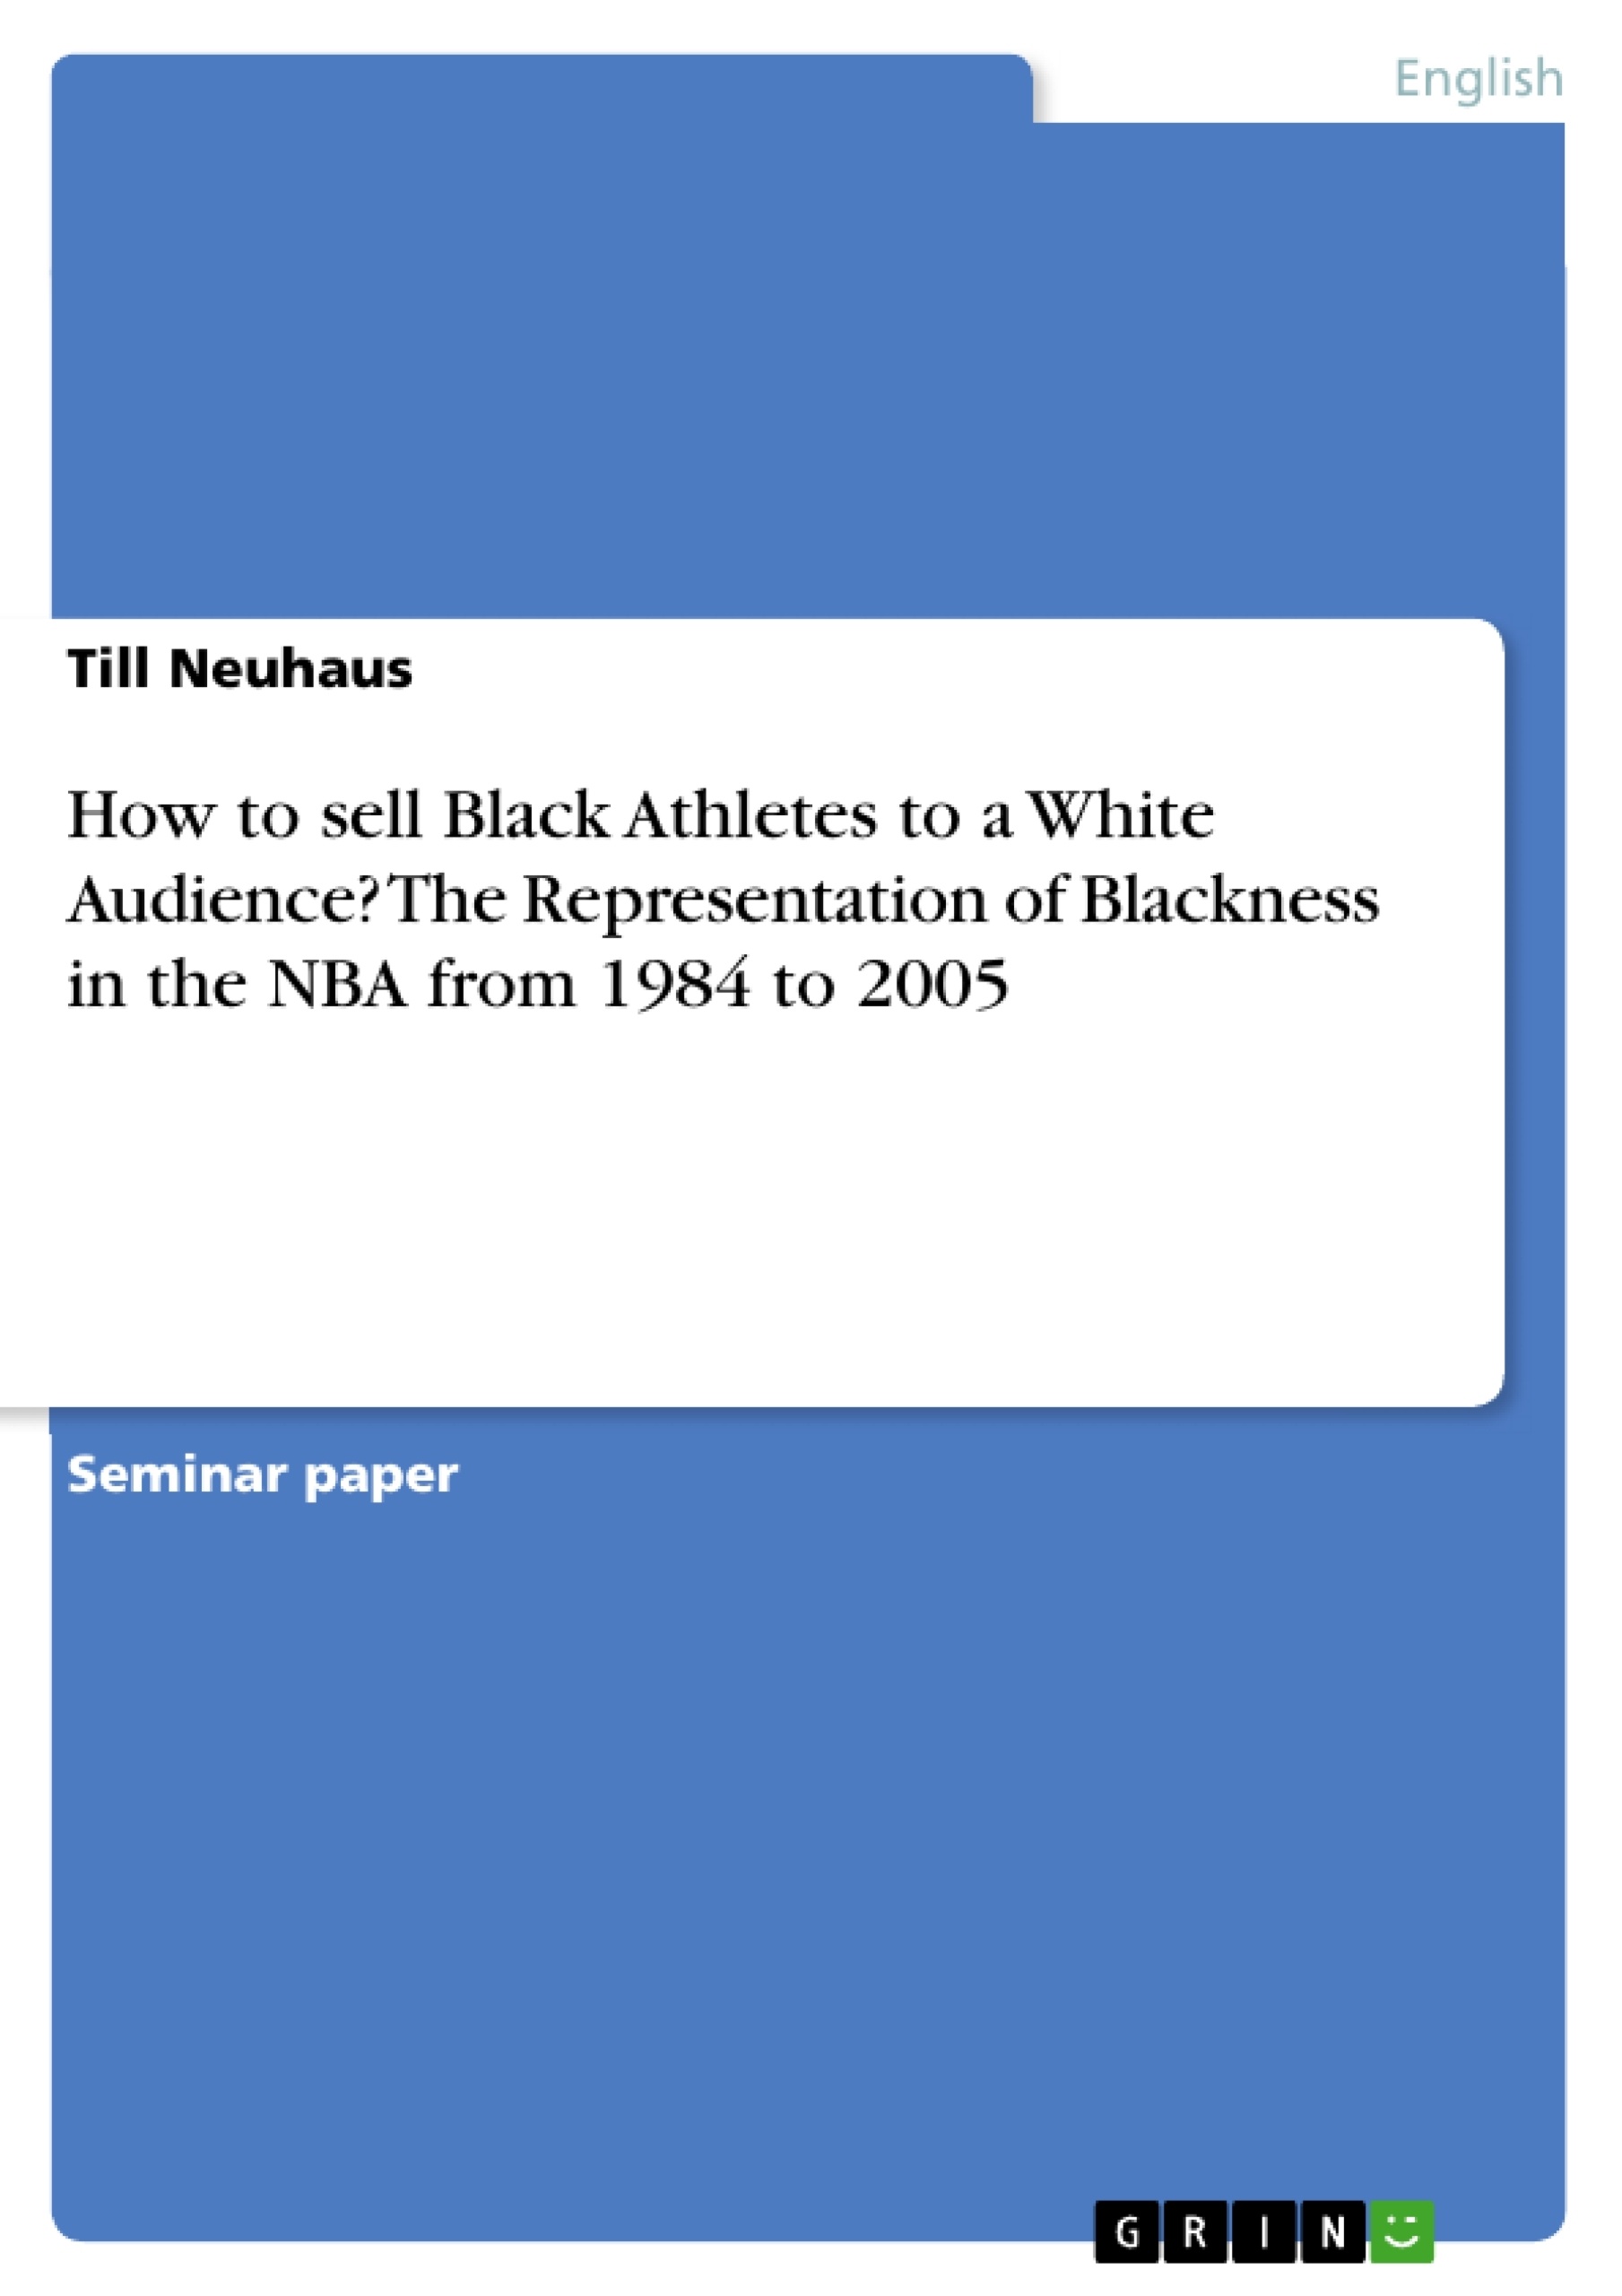 Título: How to sell Black Athletes to a White Audience? The Representation of Blackness in the NBA from 1984 to 2005